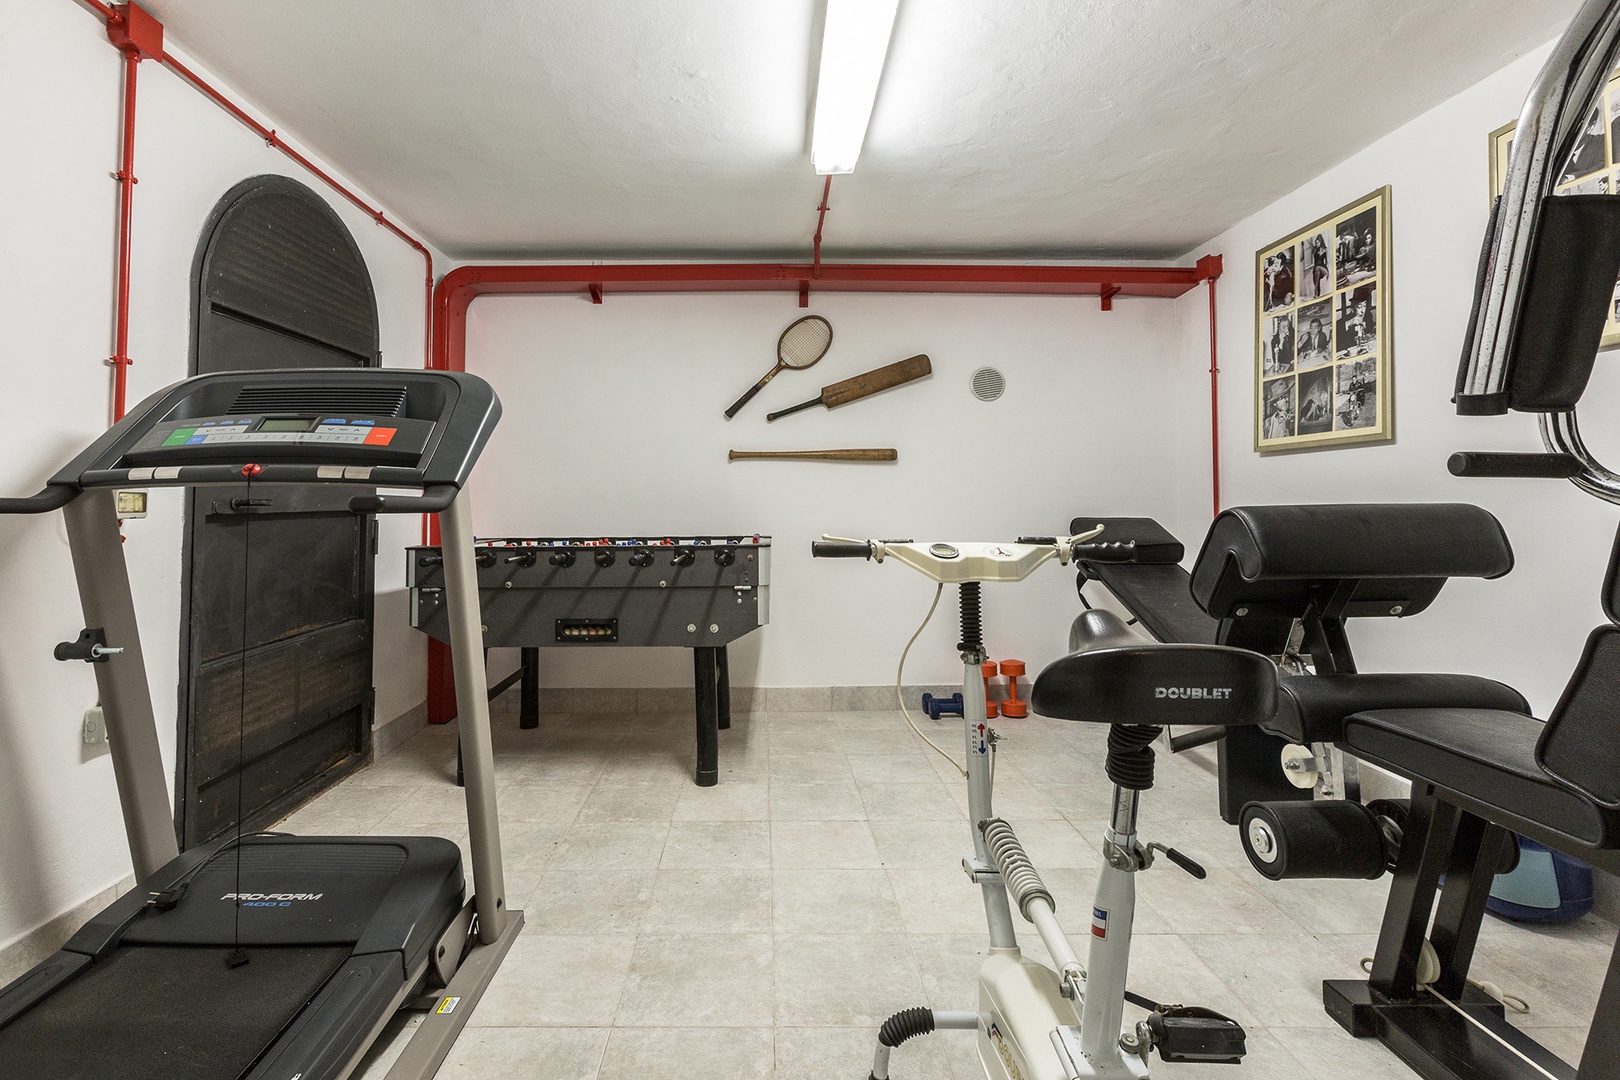 A mini gym is in the pool house located under the pool area.